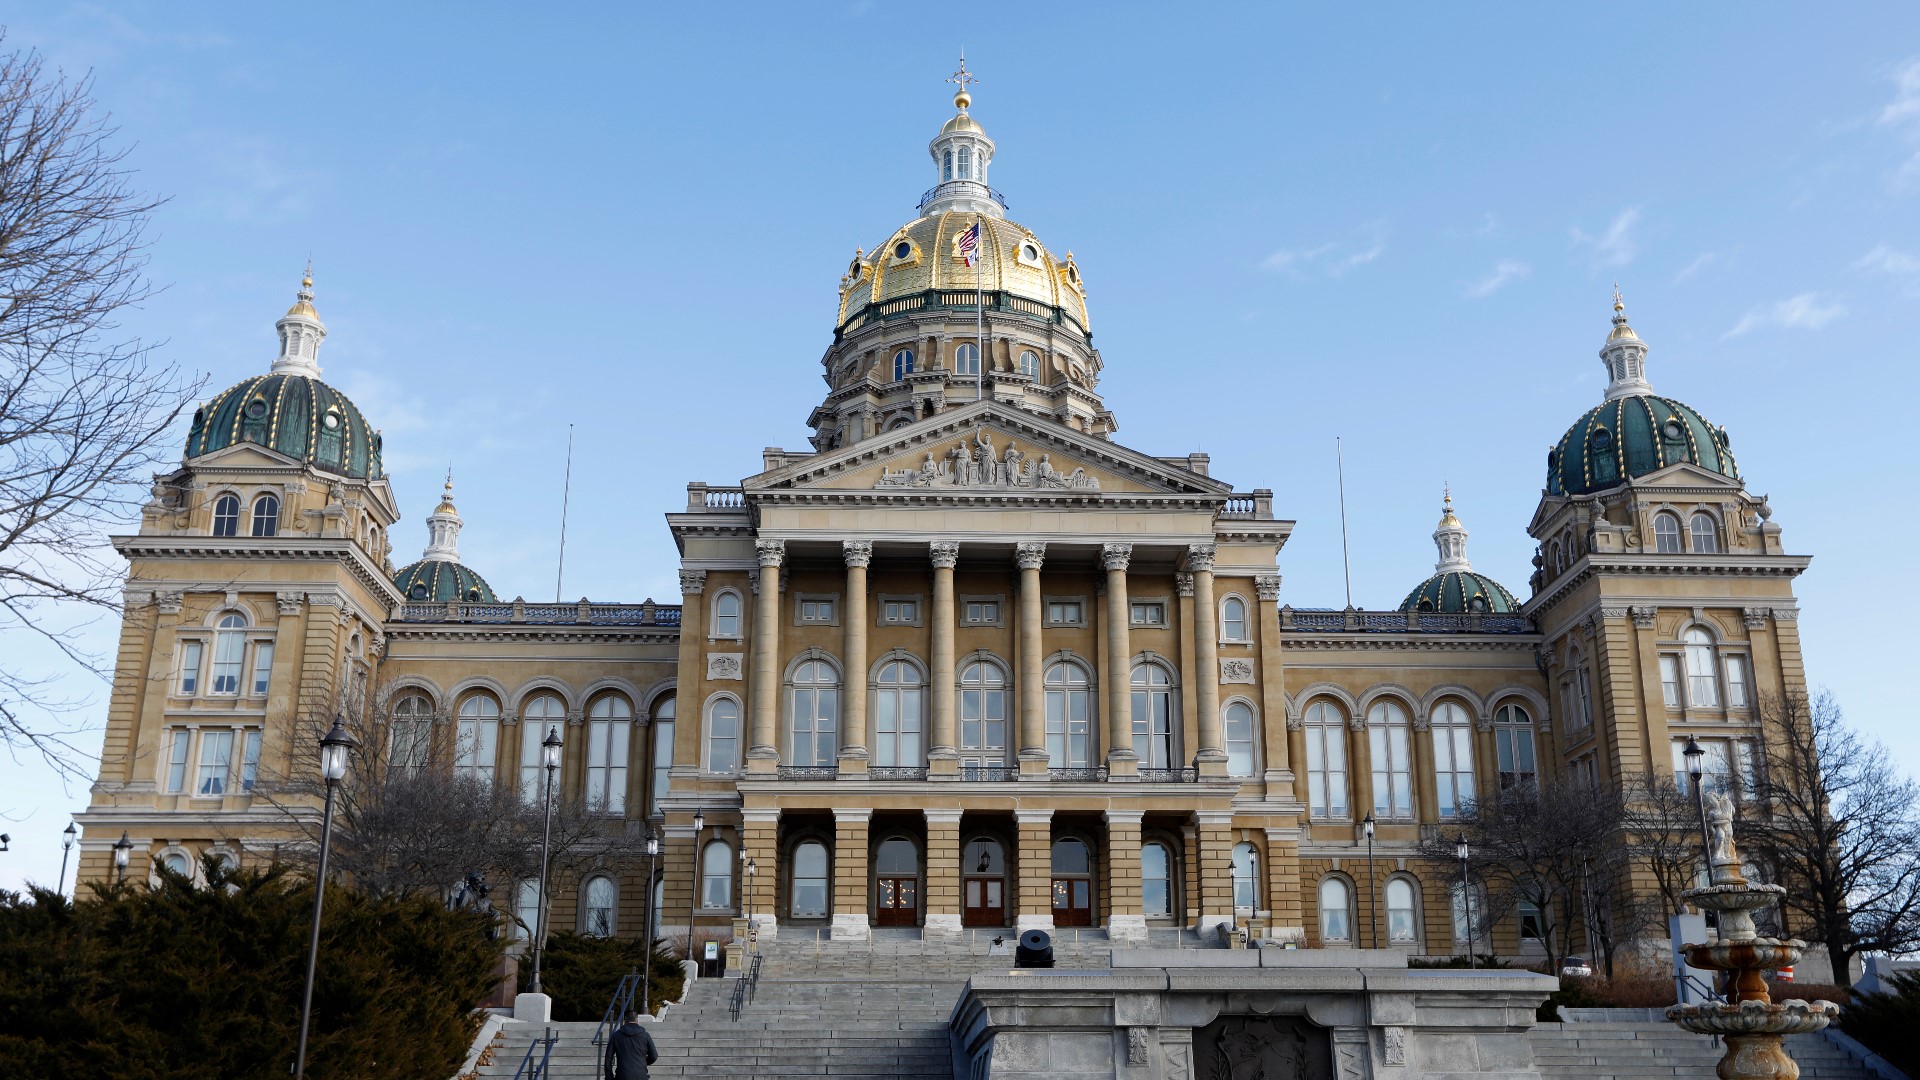 Republicans currently hold chambers of the Iowa Legislature, but Democrats are looking to gain momentum and potentially take control of the House.